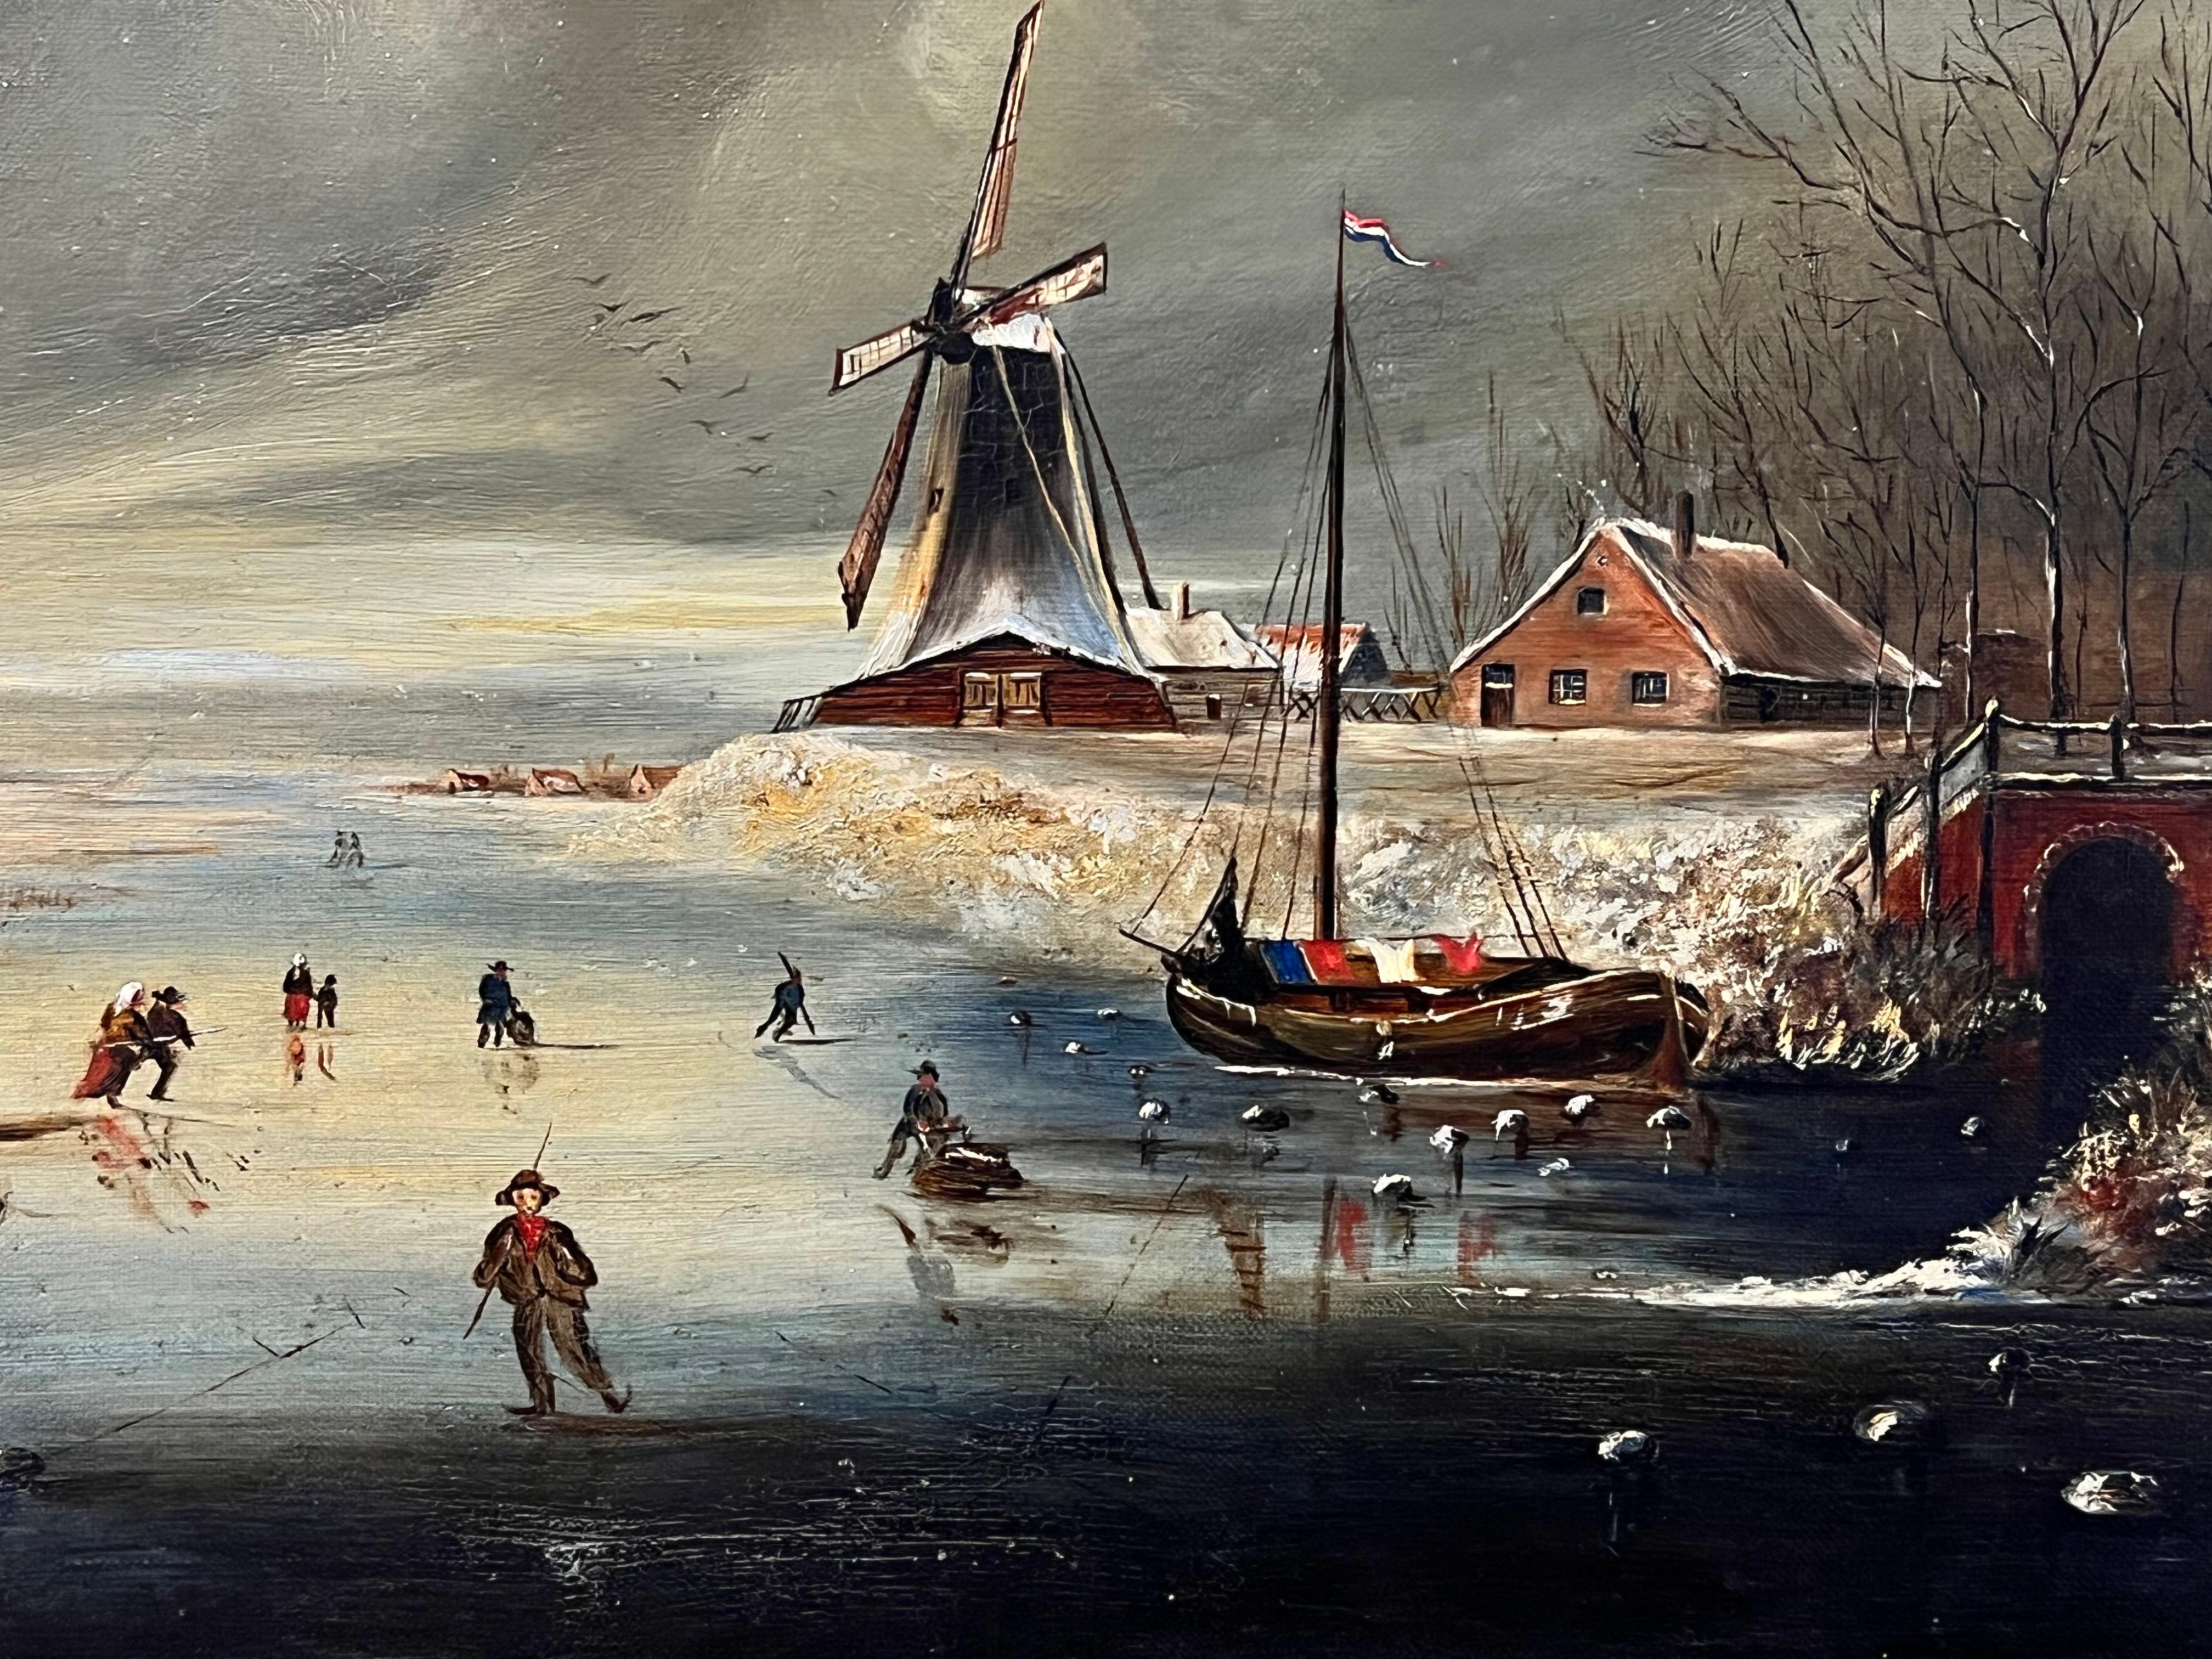 Artist/ School: Dutch or Flemish School, 19th century

Title: Winter Games

Medium: oil on canvas, framed in beautiful period antique gilt frame. 

Framed: 21.5 x 29 inches
Painting: 14 x 21 inches

Provenance: private collection,